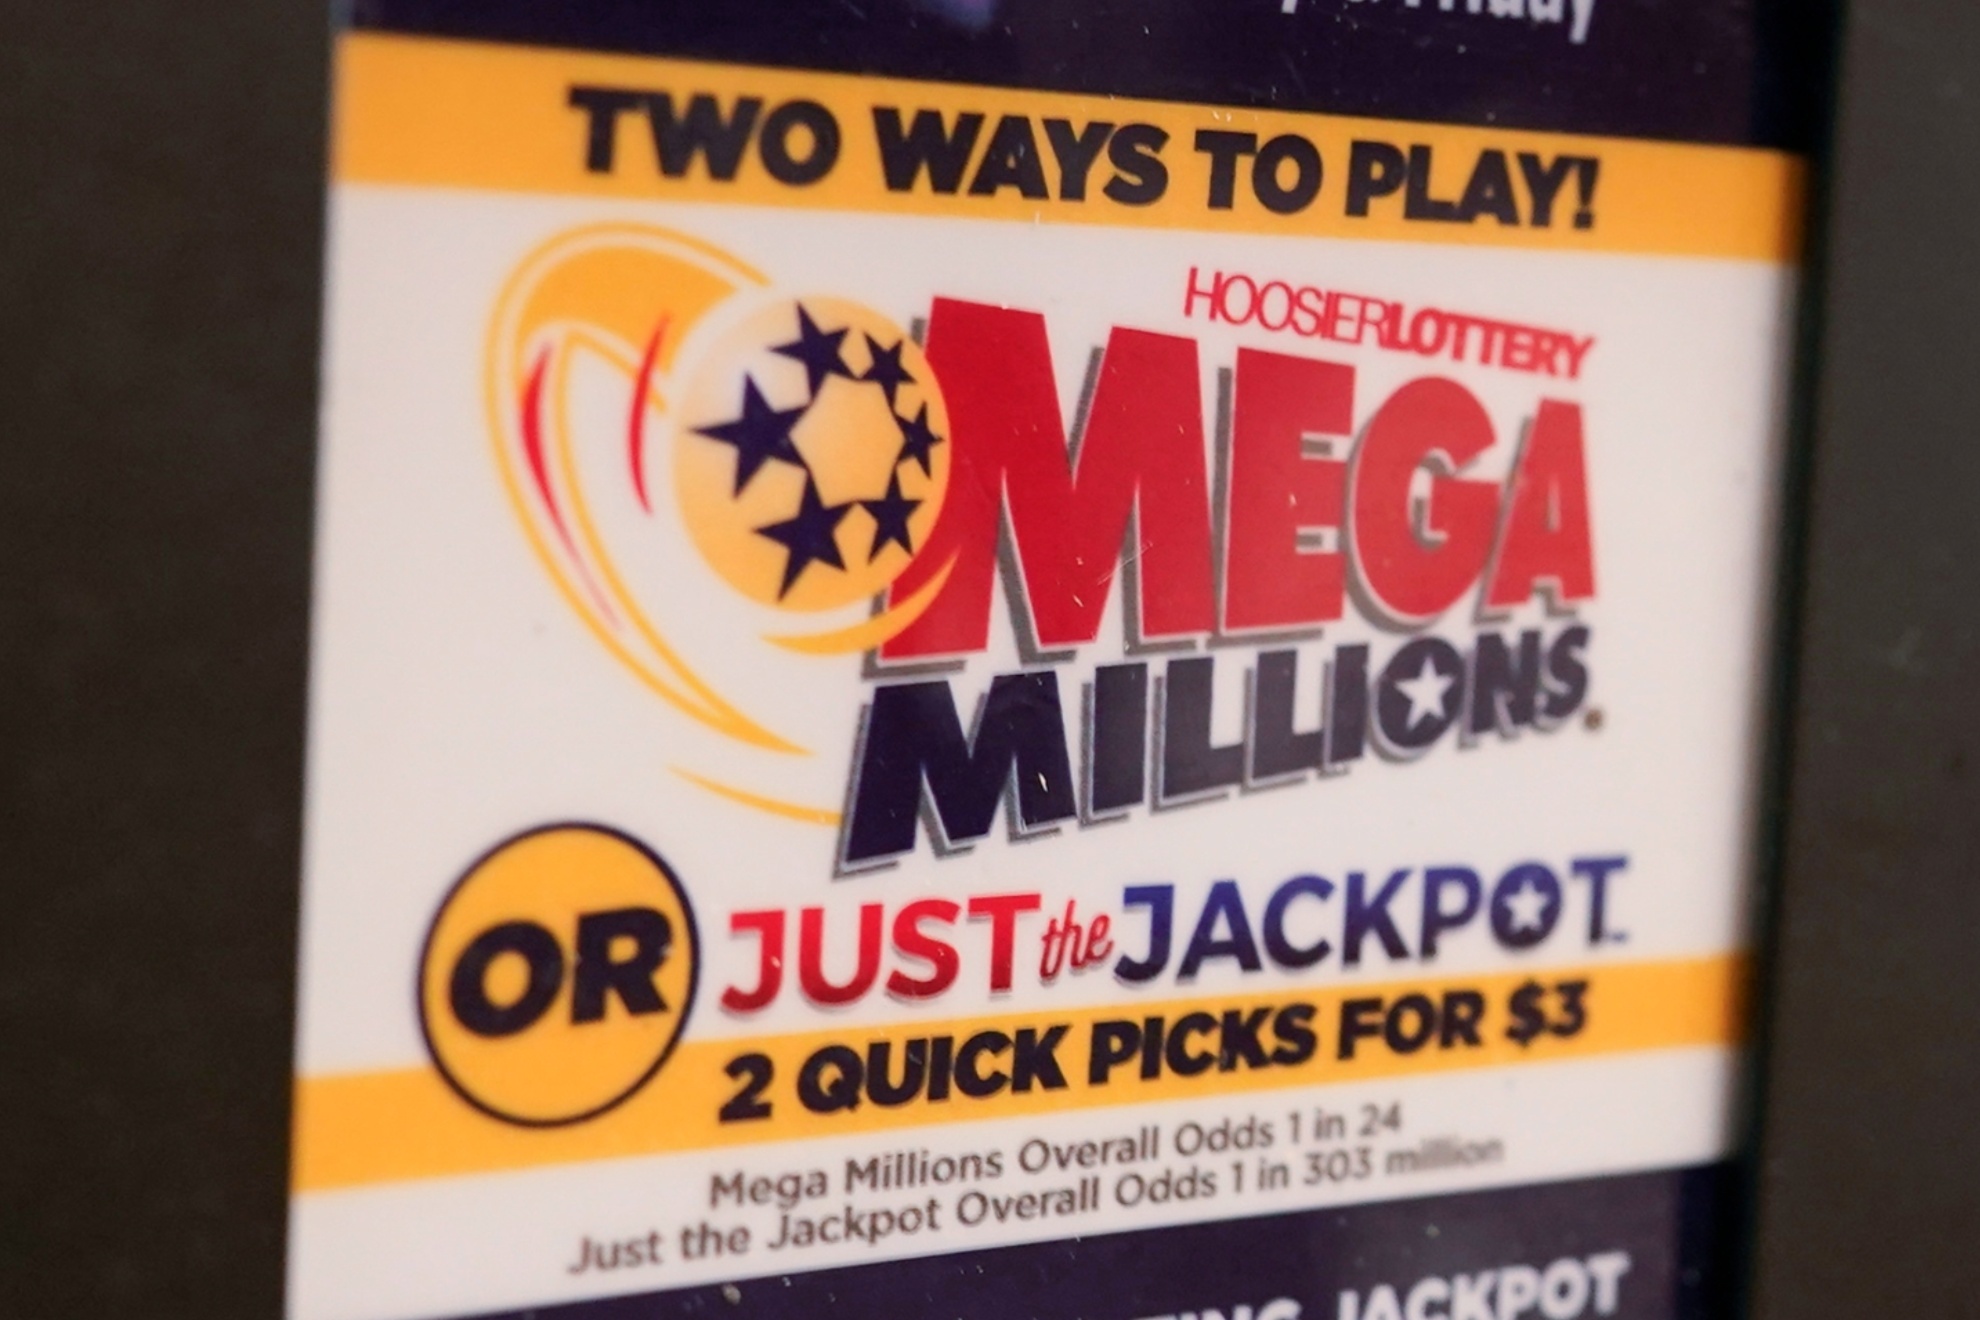 You can win millions in Mega Millions!